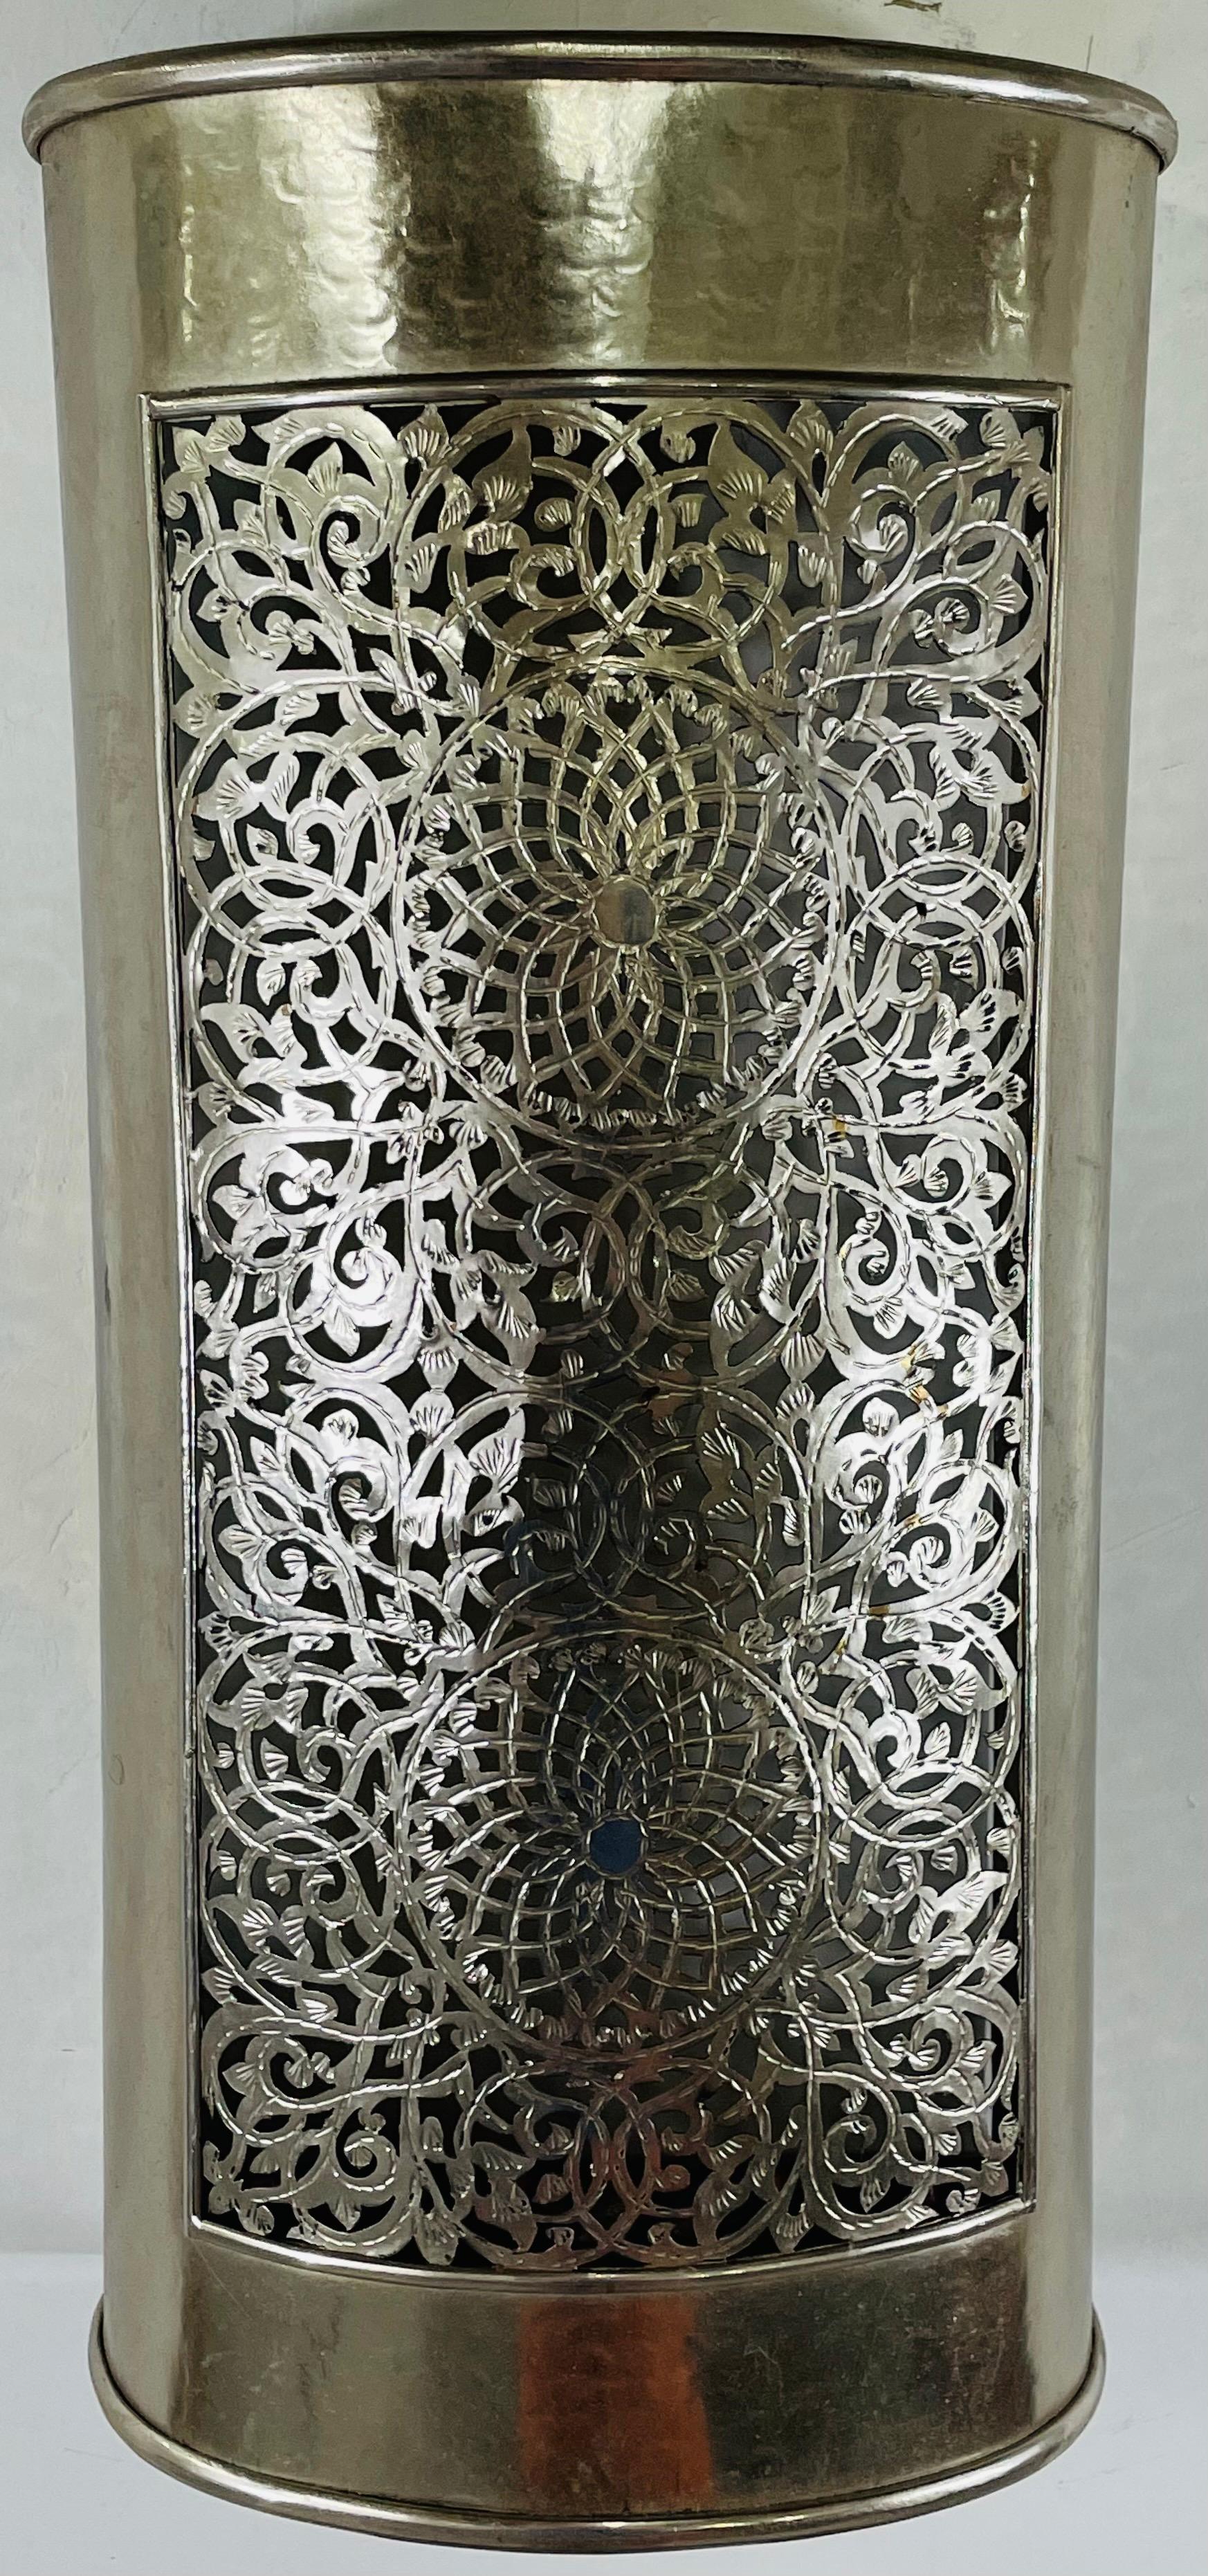 A stunning pair of vintage Moroccan style silver tone wall sconces. The sconces feature a semi cylindrical shape and intricate filigree design creating an exotic vibe and elevating the style of your space. They will look amazing in a bohemian style